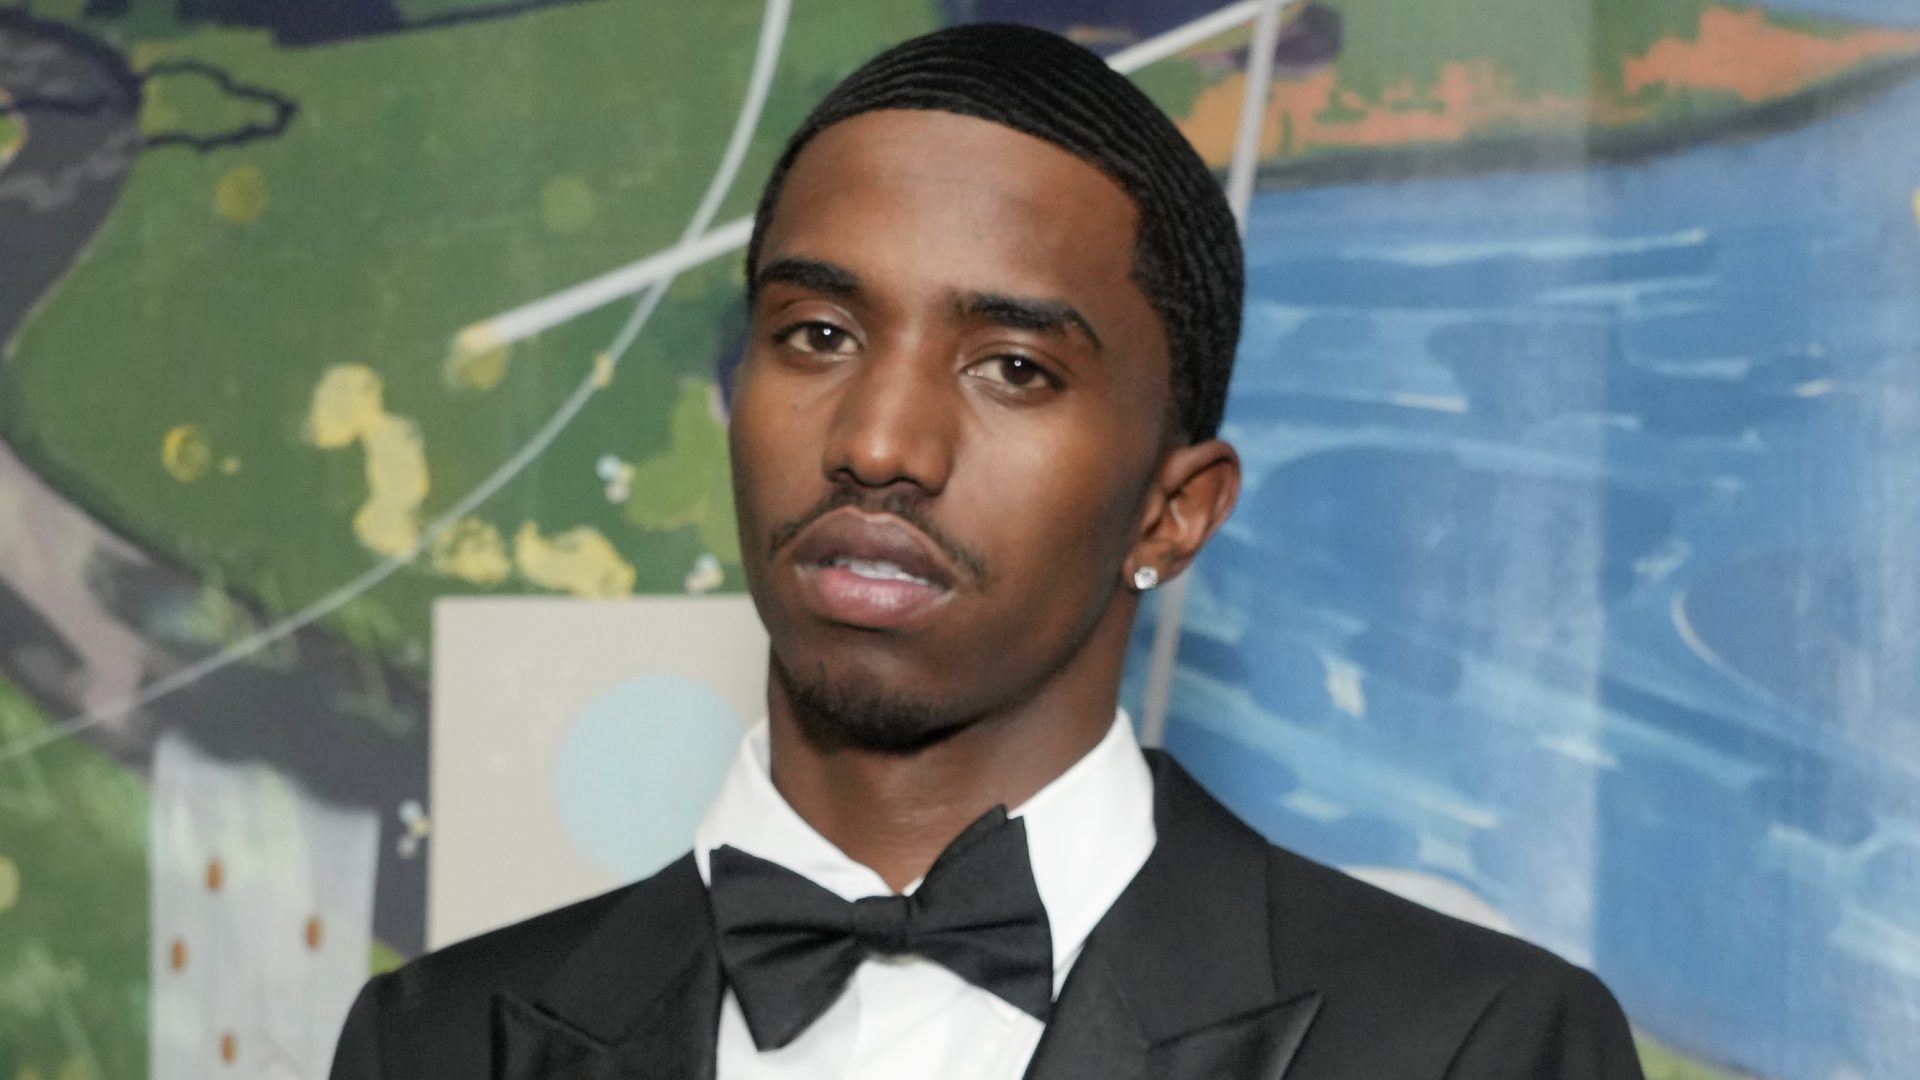 LOS ANGELES, CALIFORNIA - JUNE 26: King Combs attends Sean "Diddy" Combs celebrates BET Lifetime Achievement after party powered by Meta, Ciroc Premium Vodka and DeLeon Tequila on June 26, 2022 in Los Angeles, California.